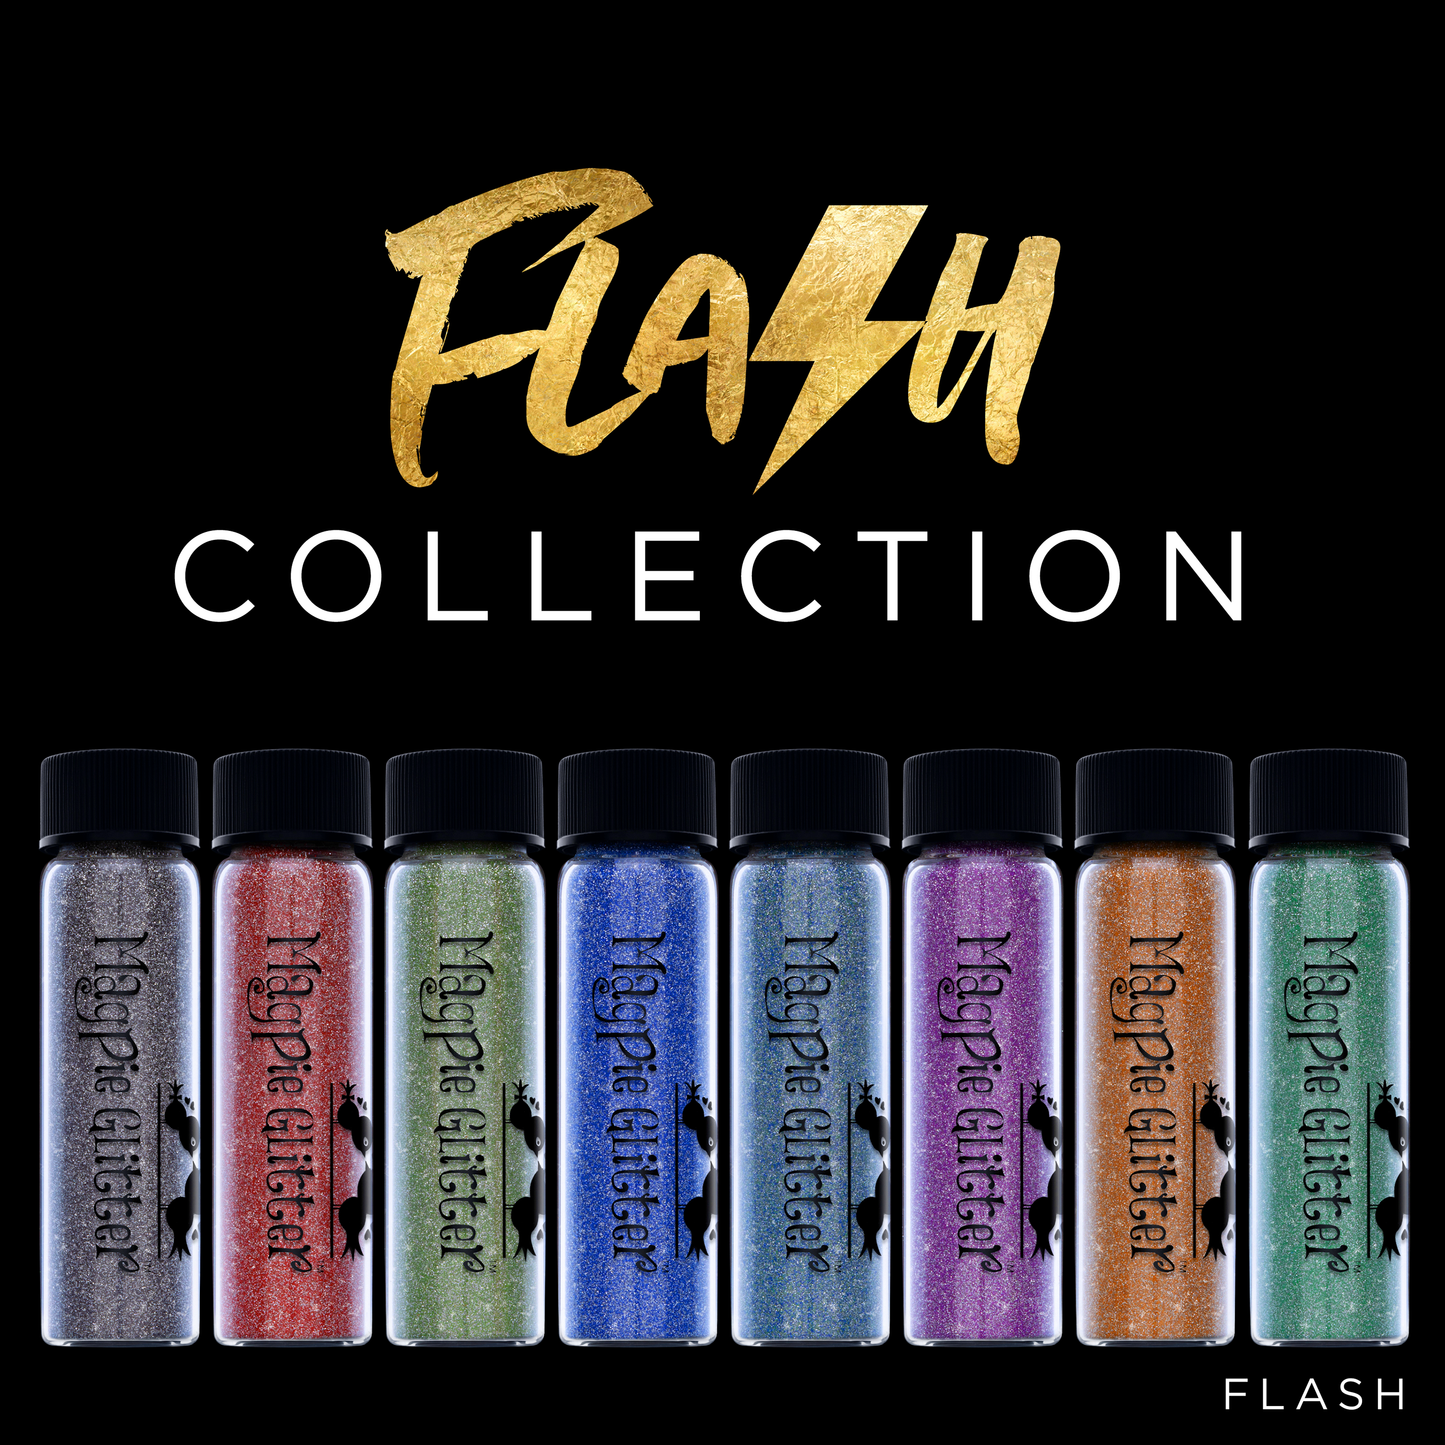 Flash Glitter Collection 2021